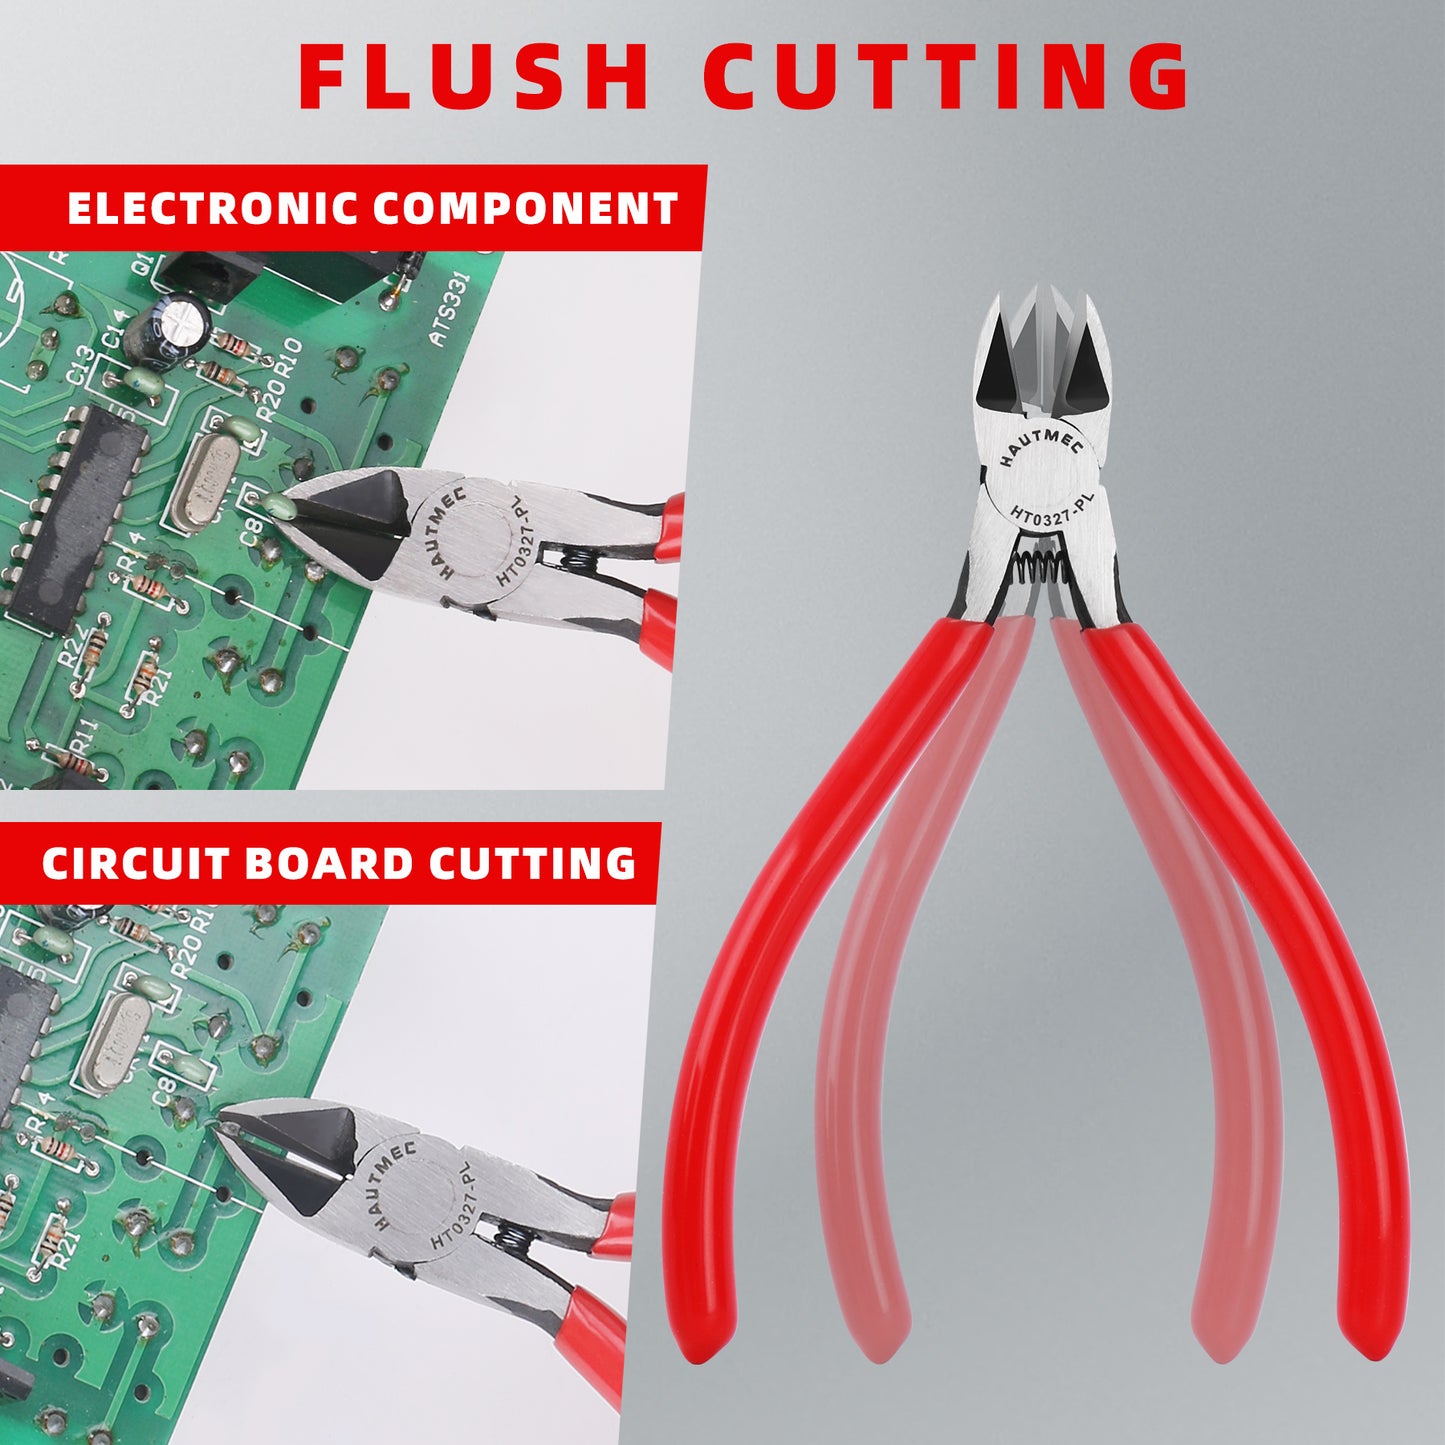 HAUTMEC 5" Precise Small Flush Cutting of Engineer Wire Cutter Plier 10PCS with Location Pin for Fine Shearing, Perfect for Circuit Board Cutting, Electronic Components, HT0327-10PC